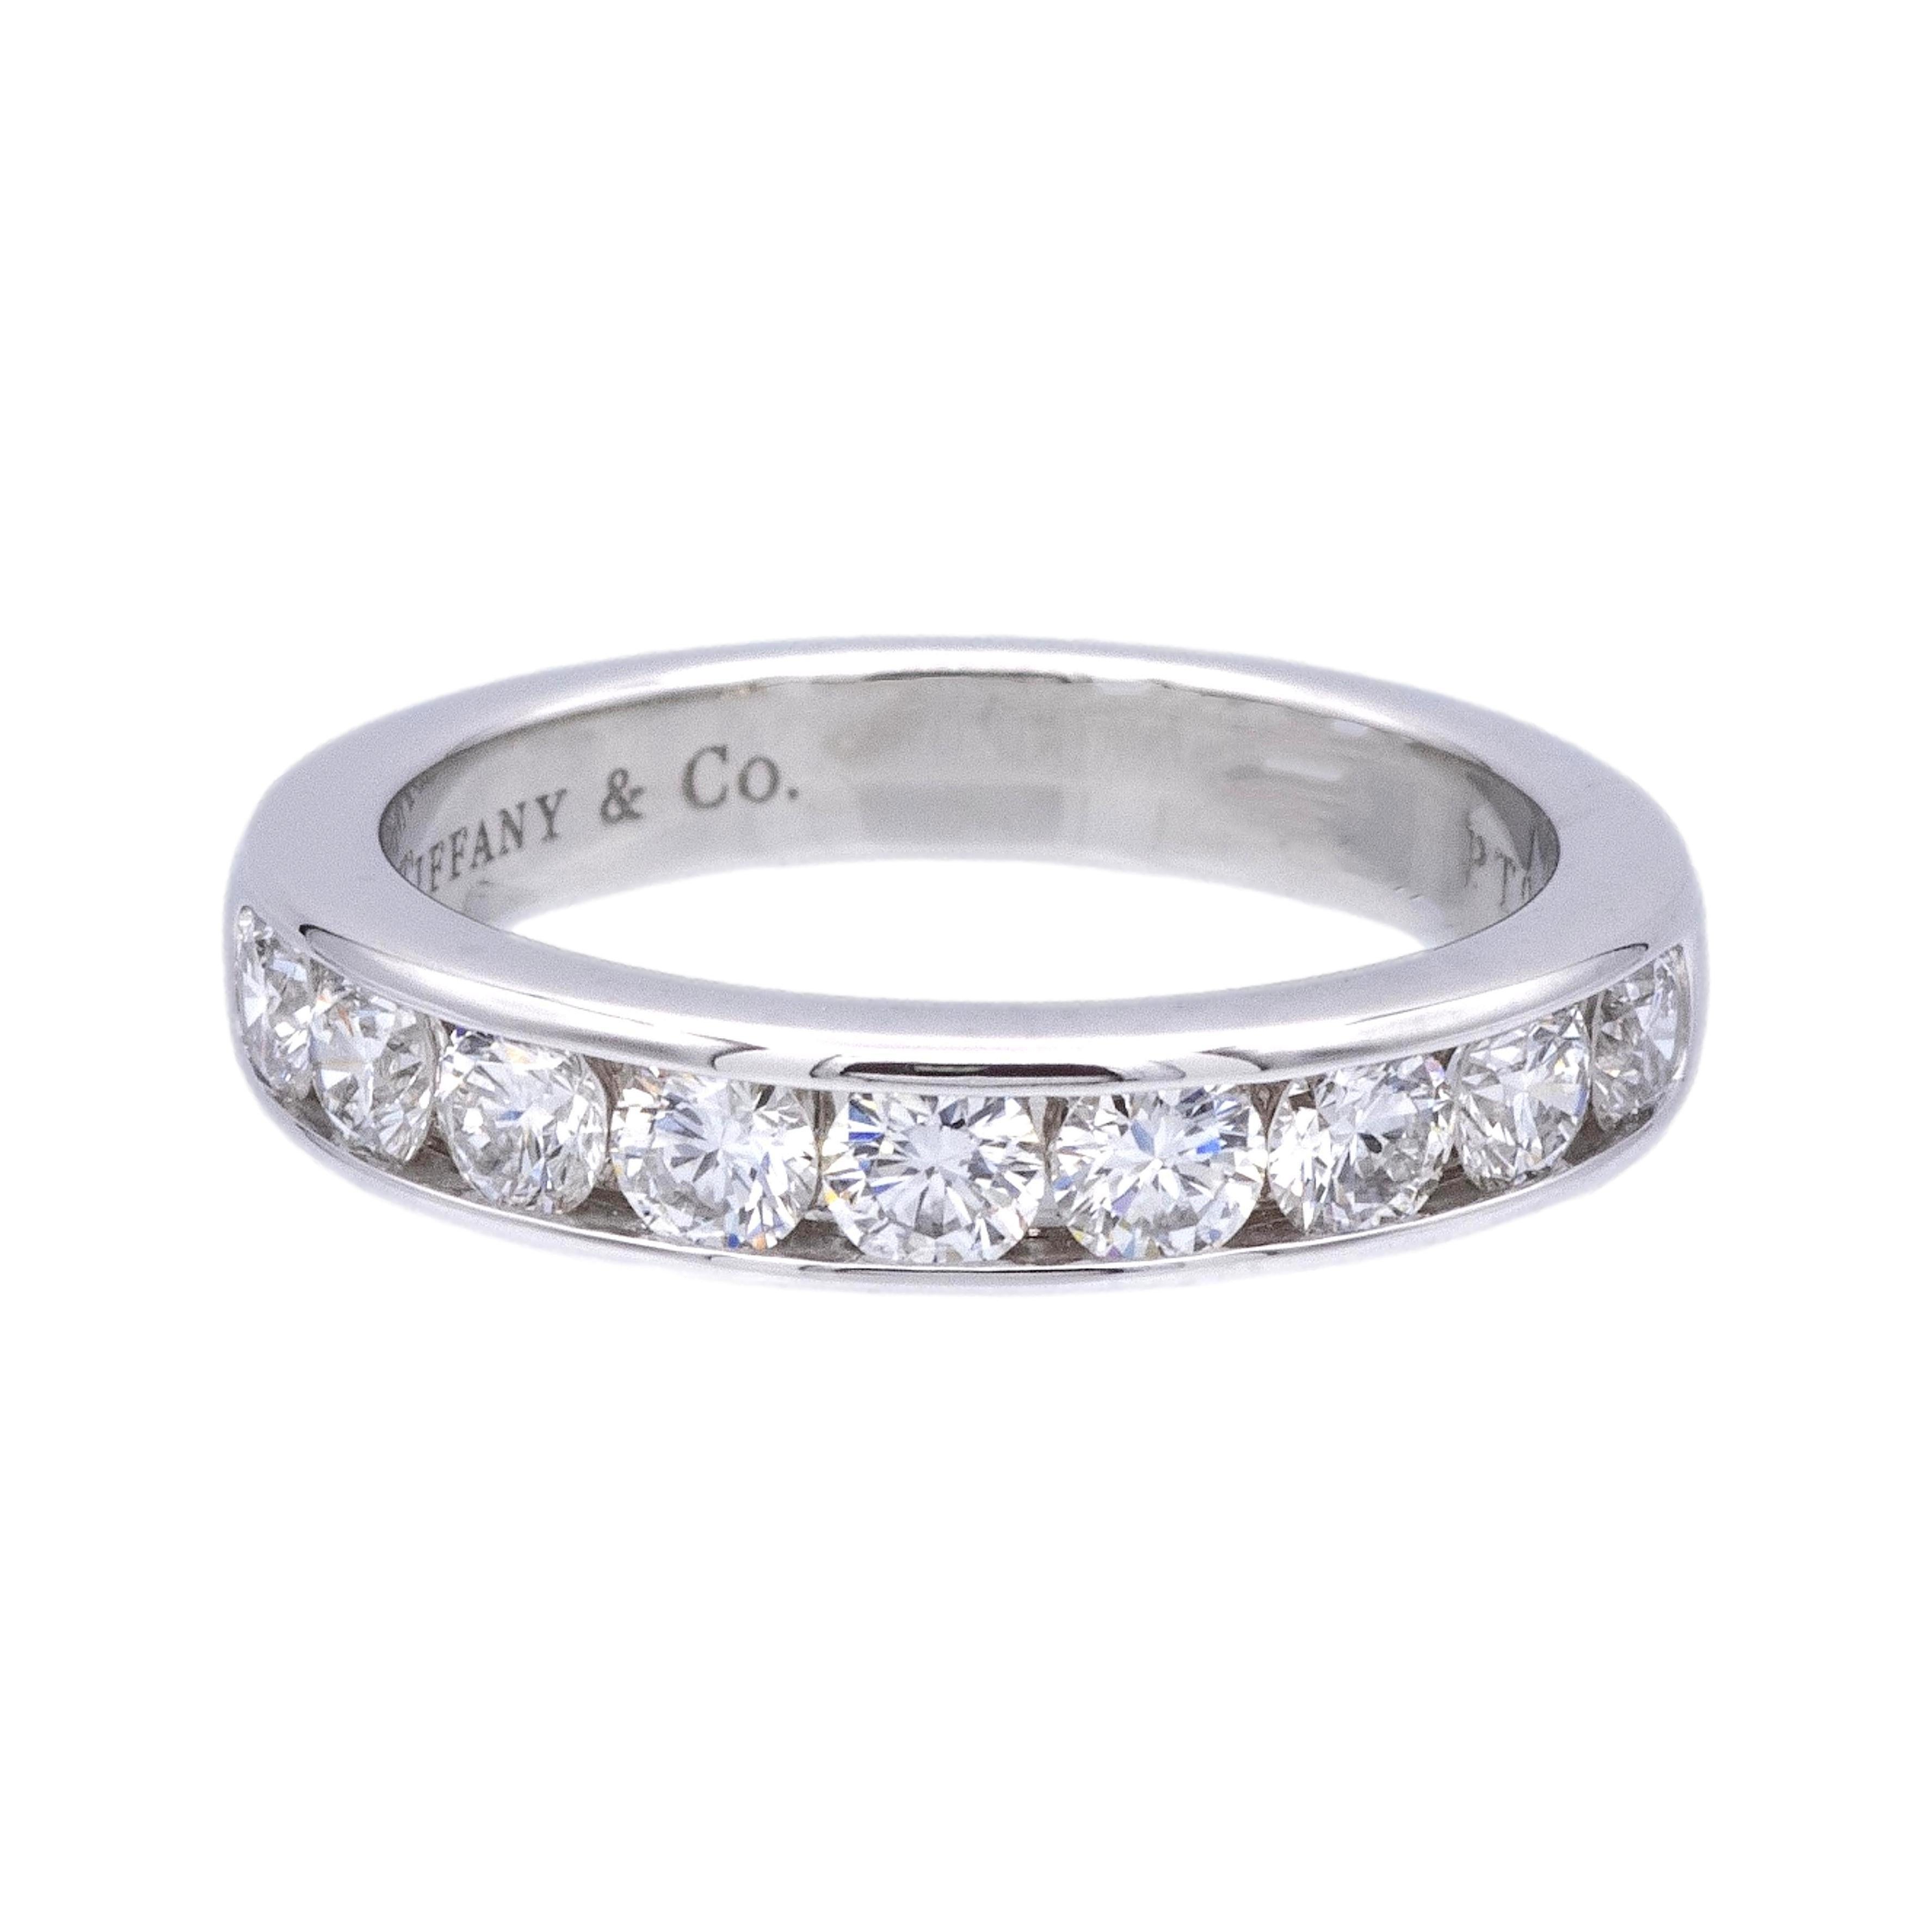 Tiffany & Co. wedding band ring from the 